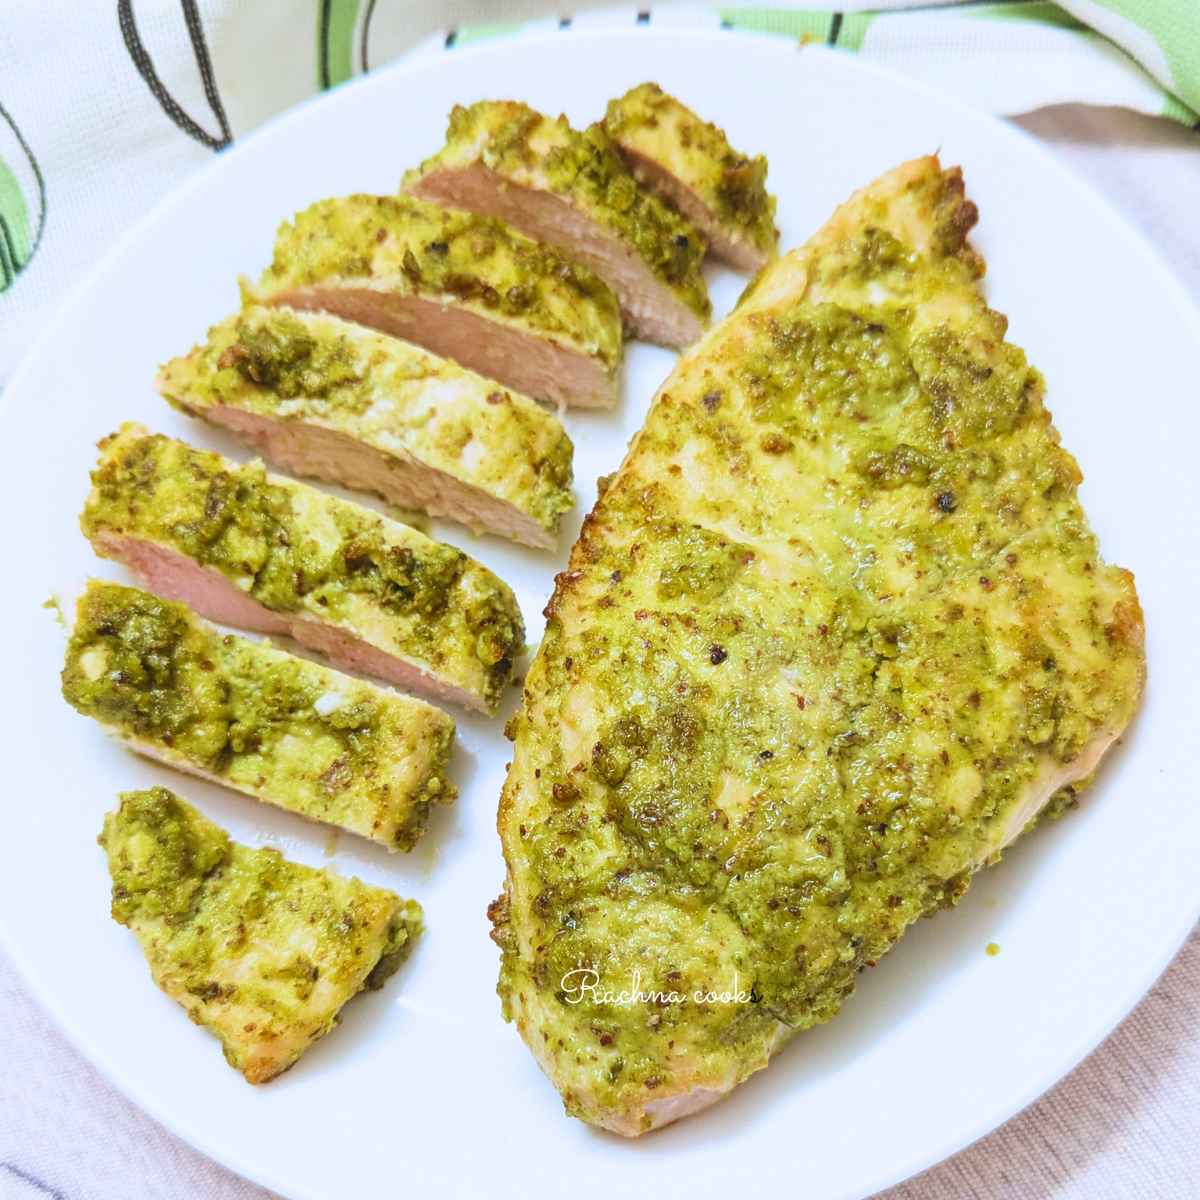 Air fried pesto chicken breasts served on a white plate. One breast is whole,the other is sliced.